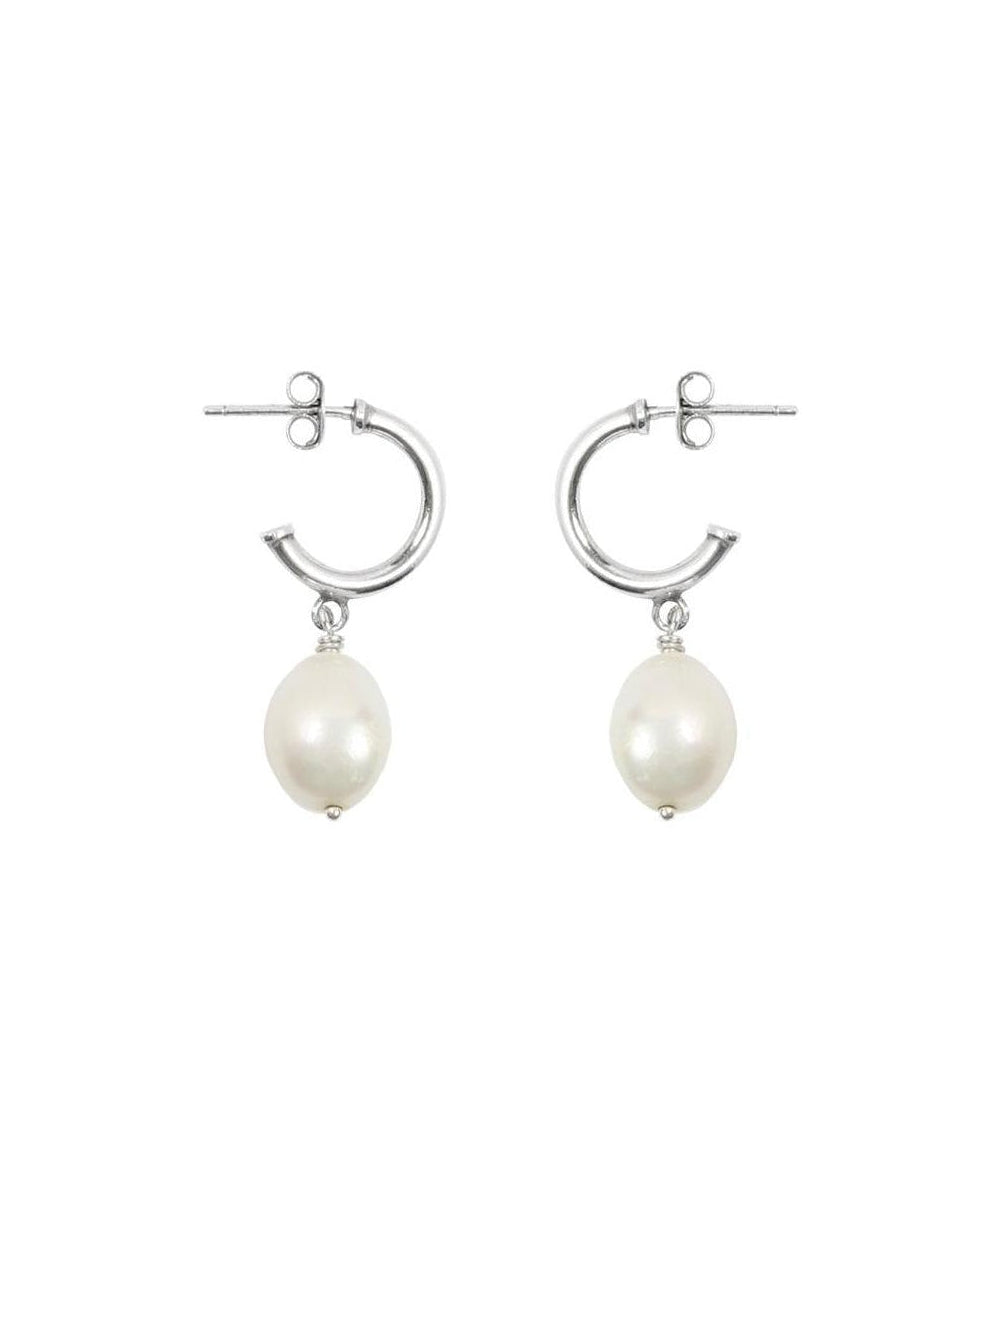 Silver C hoop earrings with pearl on white background 